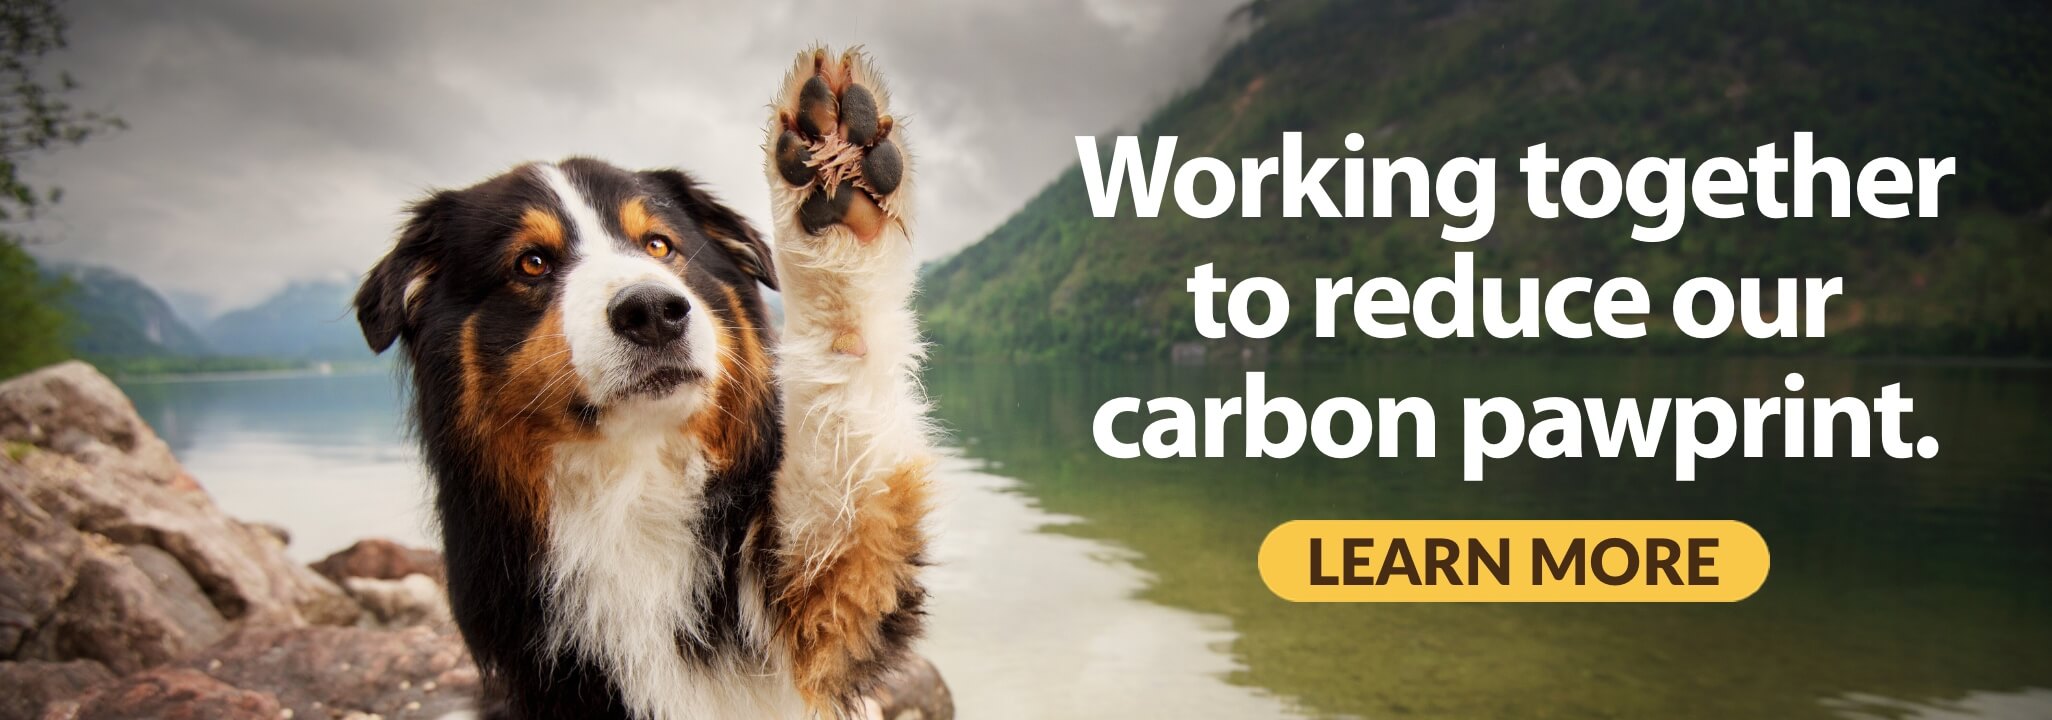 Working together to reduce our carbon pawprint